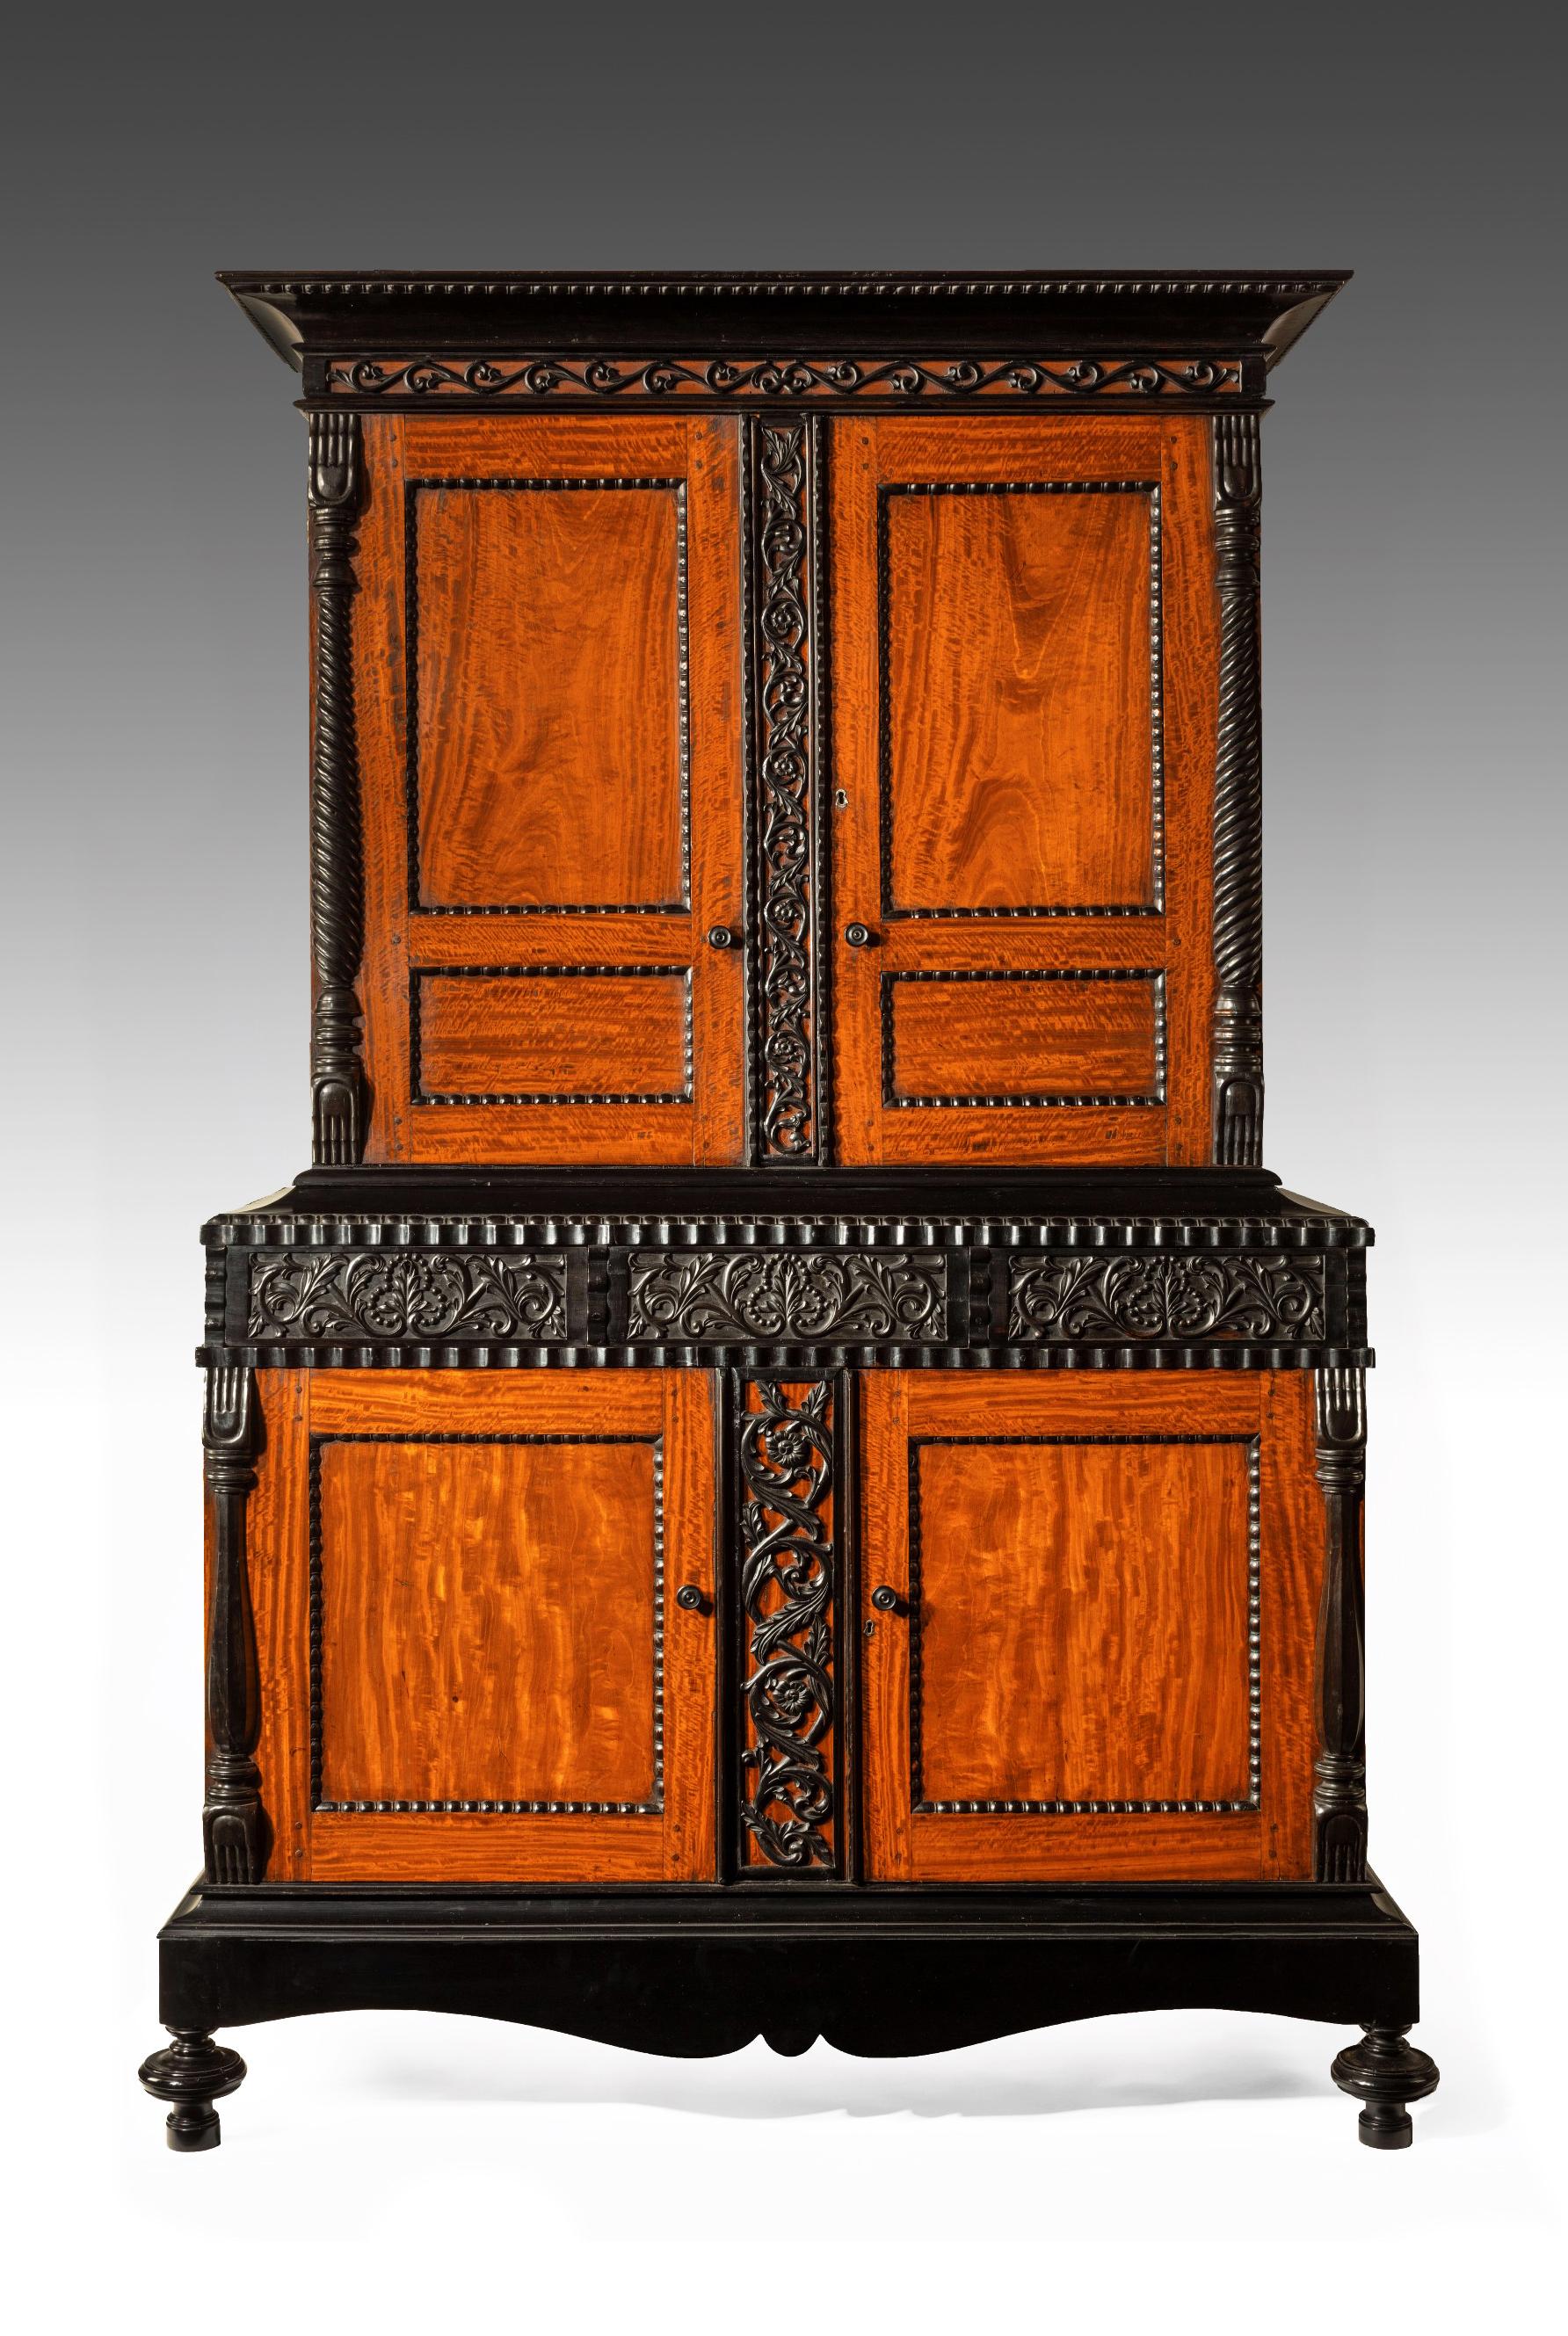 A fabulous exhibition quality early 19th century Ceylonese Indo-Dutch solid satinwood and ebony cabinet.

Ceylon (Sri Lanka) circa 1830. 

A stunning and rare Dutch Colonial satinwood cabinet / armoire with ebony carved detail. 

The solid